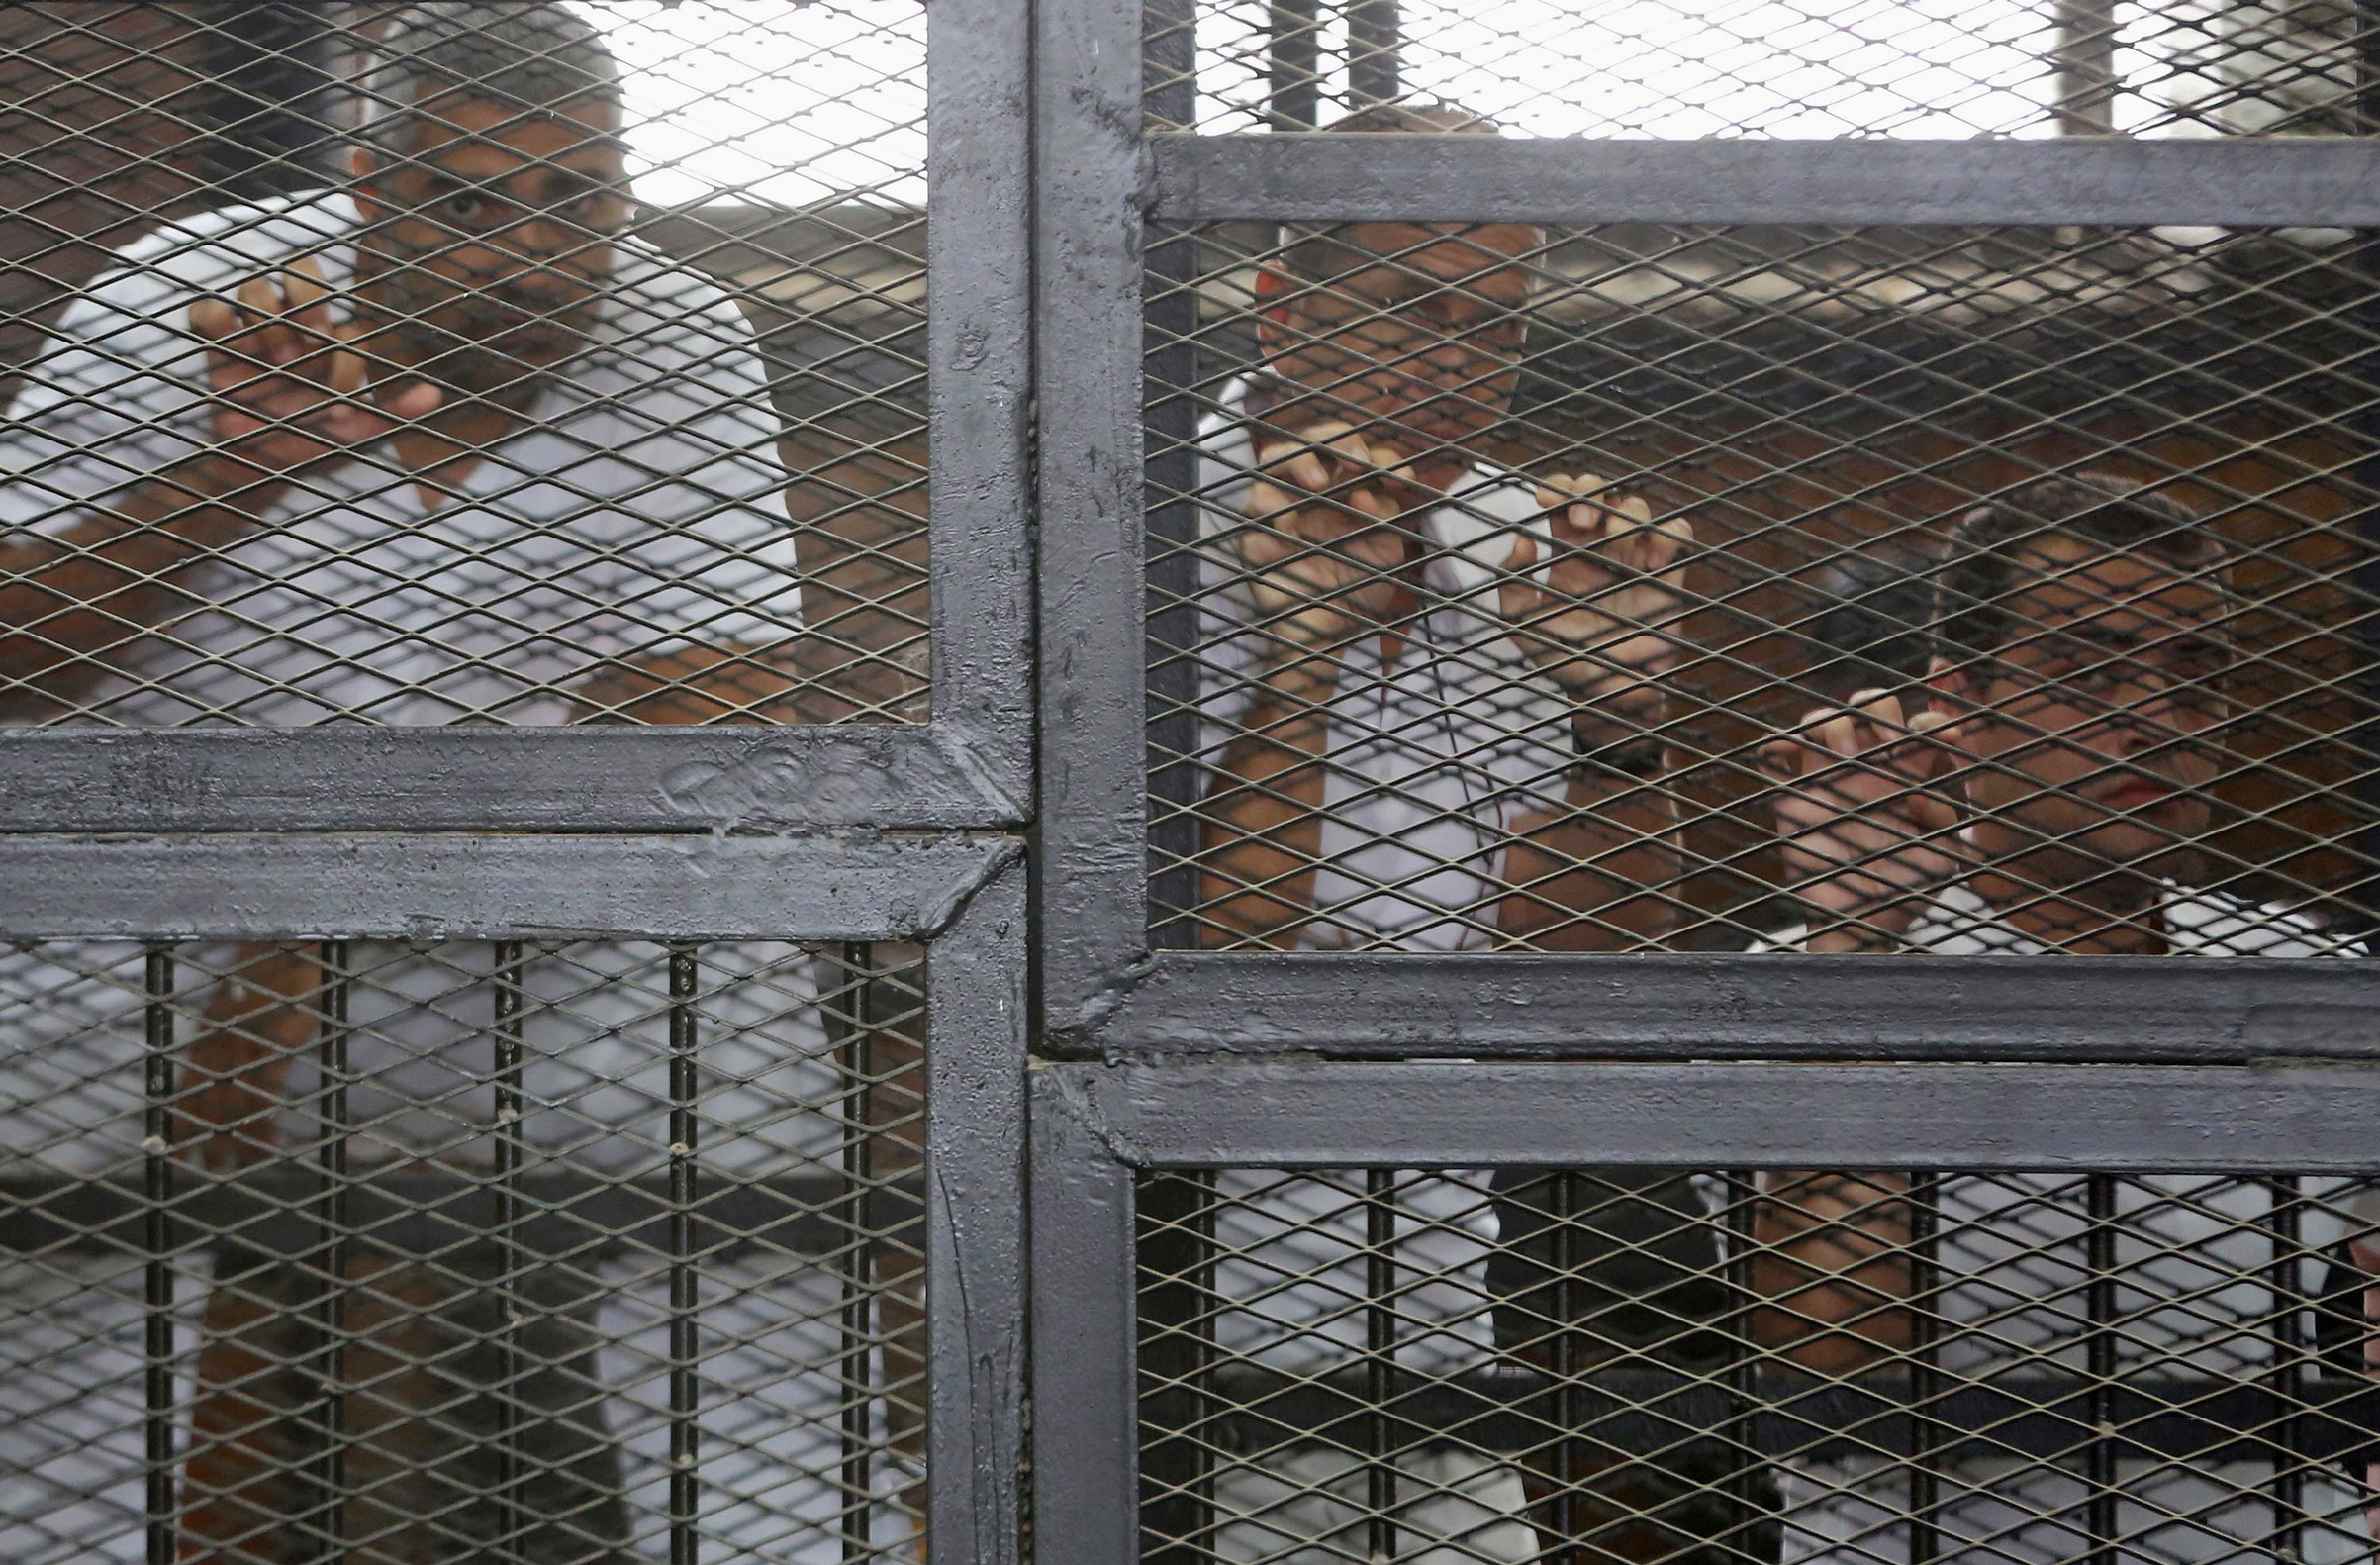 Al Jazeera journalists Mohammed Fahmy, Peter Greste and Baher Mohamed behind bars at a court in Cairo on May 15, 2014. (Reuters)